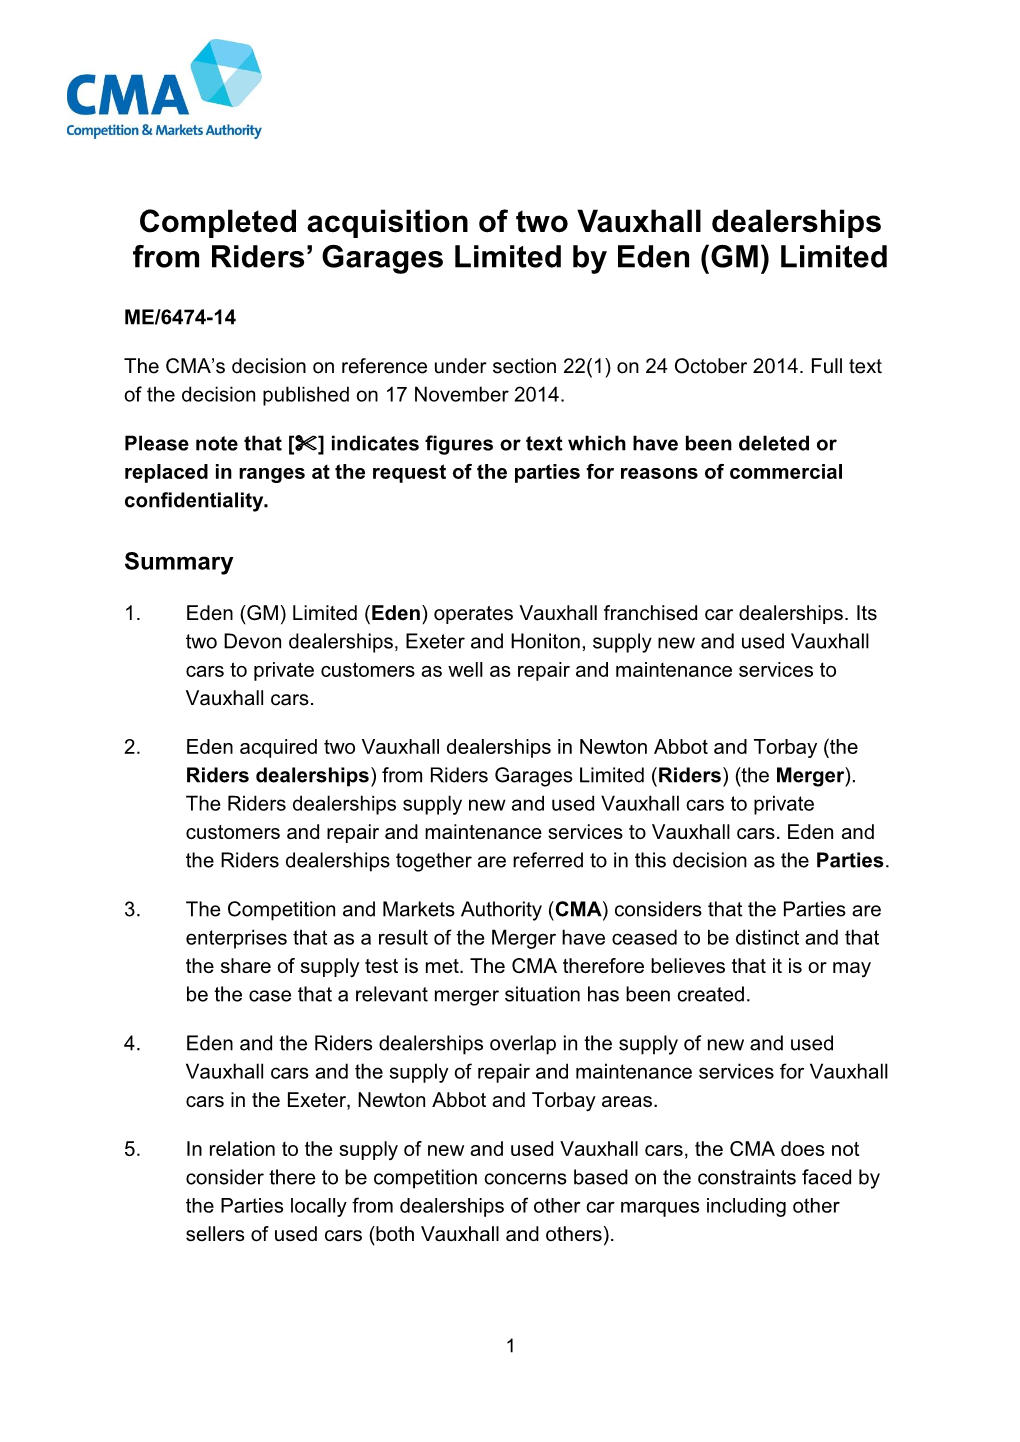 Completed Acquisition of Two Vauxhall Dealerships from Riders' Garages Limited by Eden